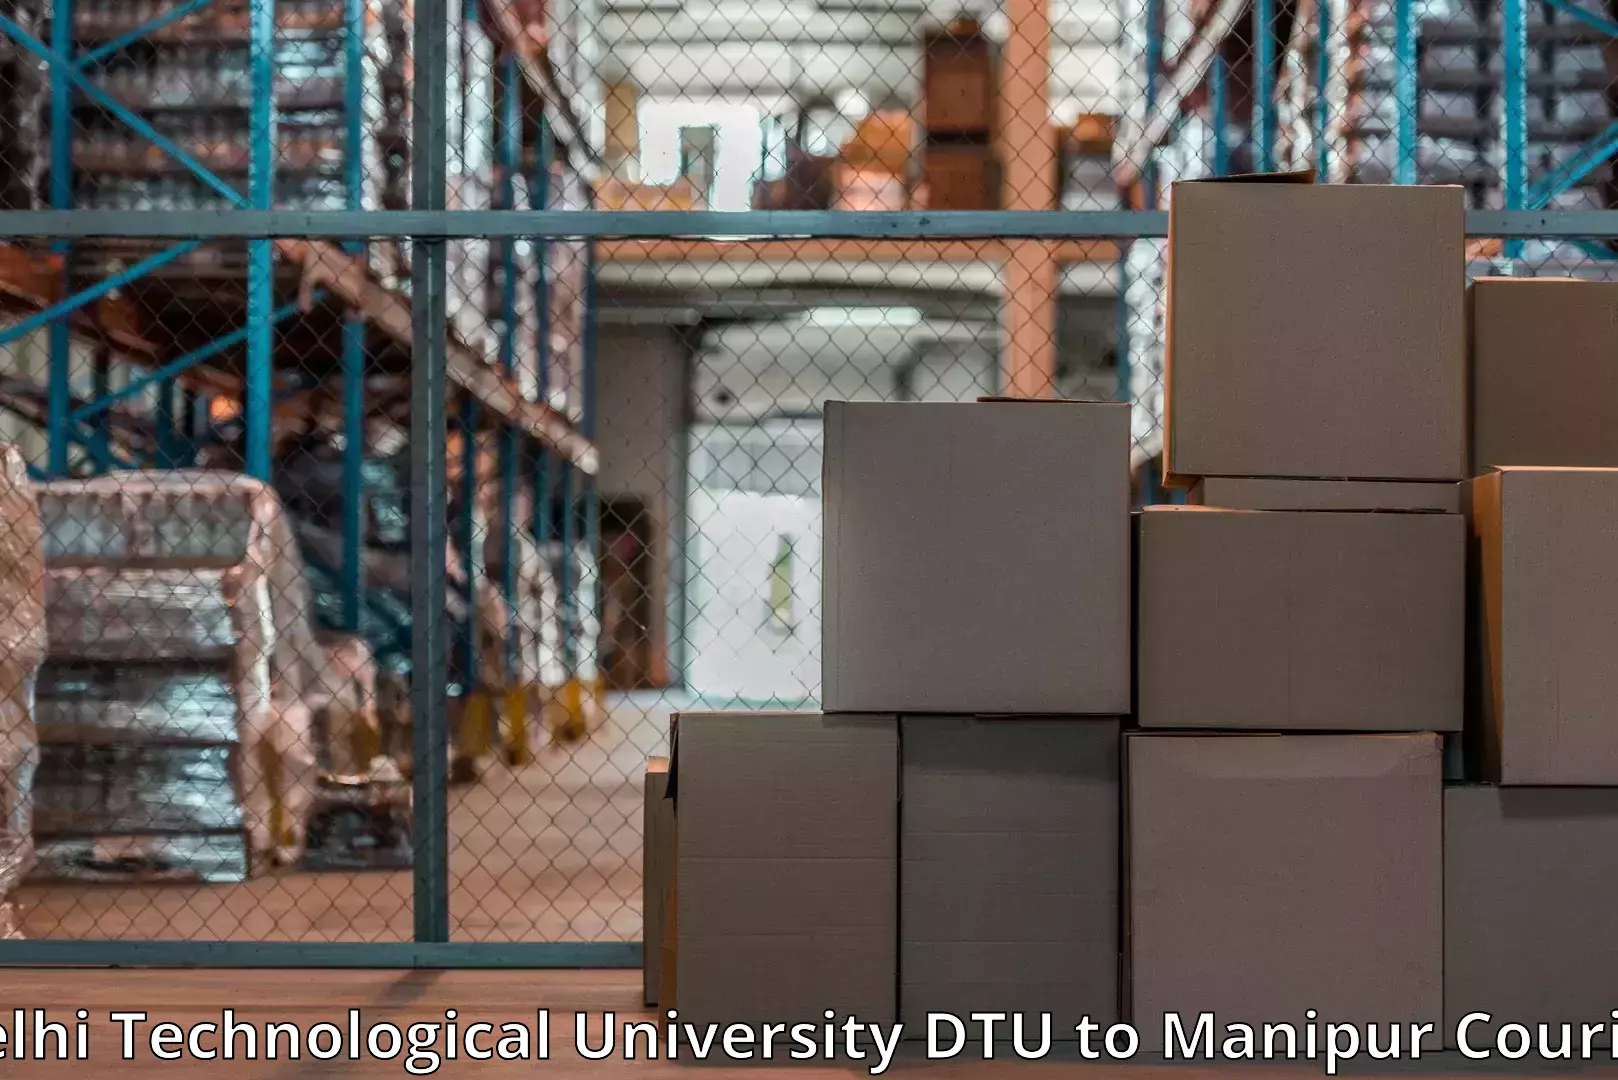 Moving and storage services Delhi Technological University DTU to Manipur